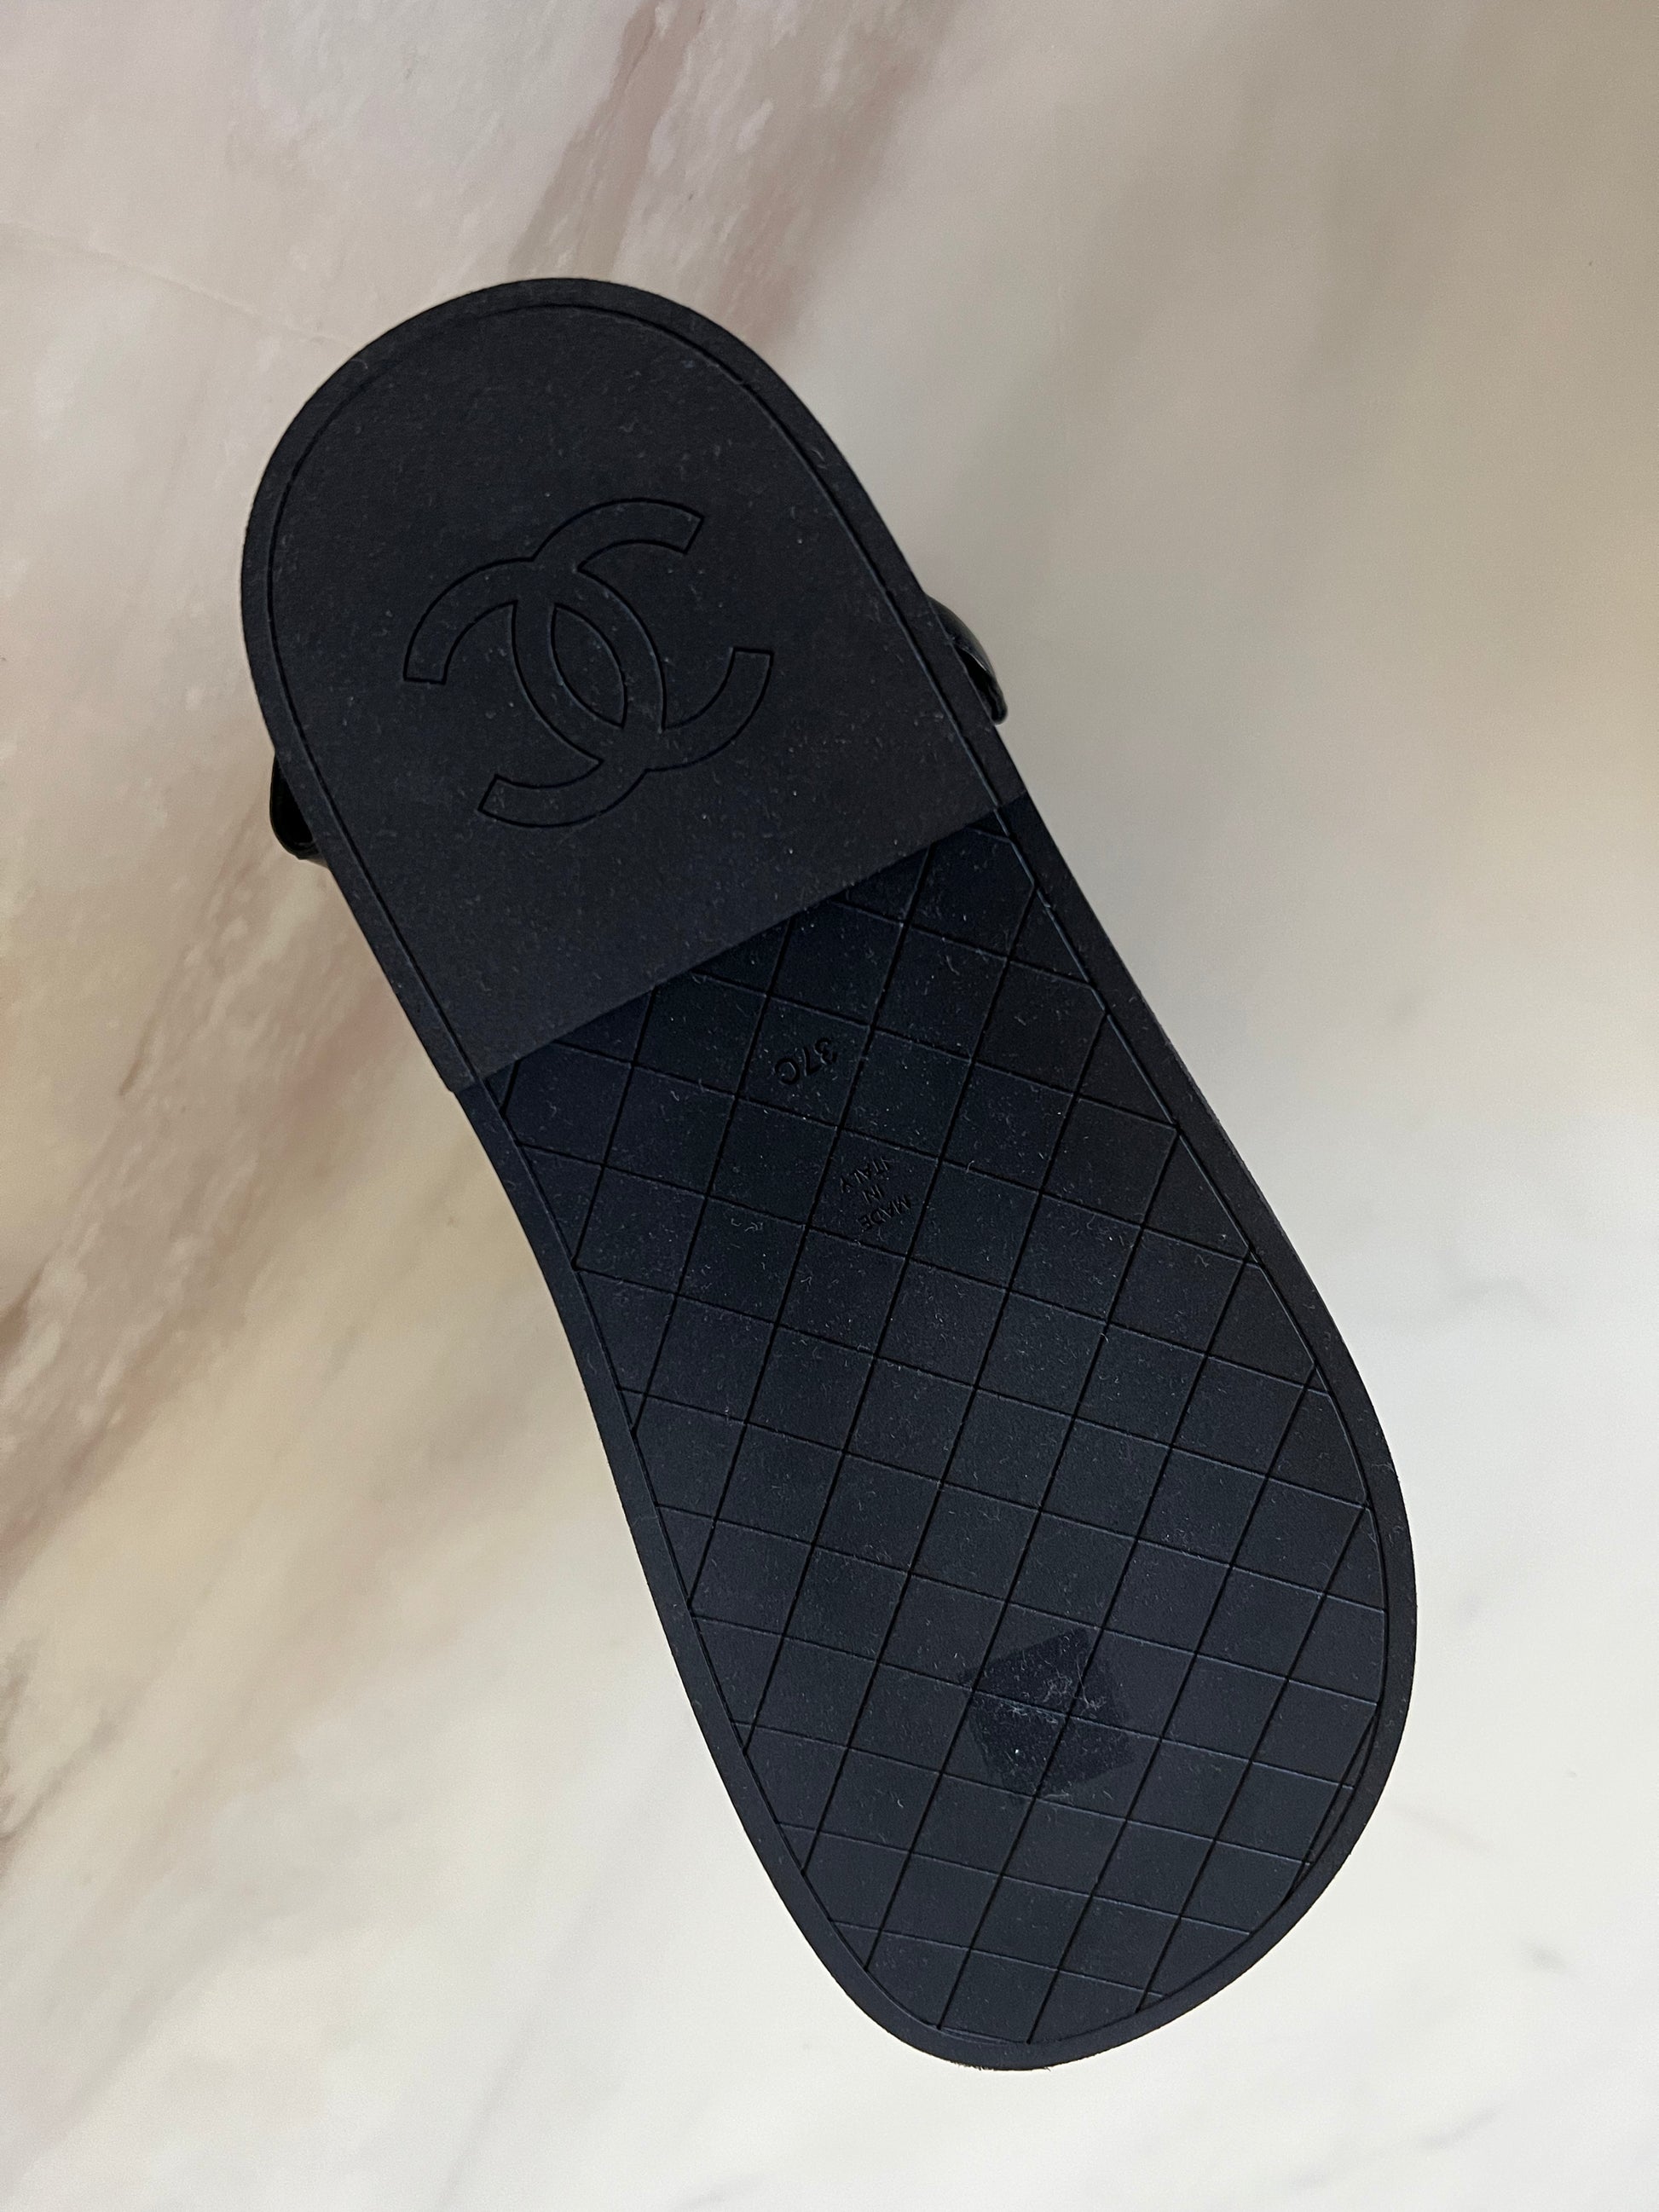 Hotel Rejsende købmand At øge CHANEL Black Pillow CC Dad Sandals Size 37 – AYAINLOVE CURATED LUXURIES